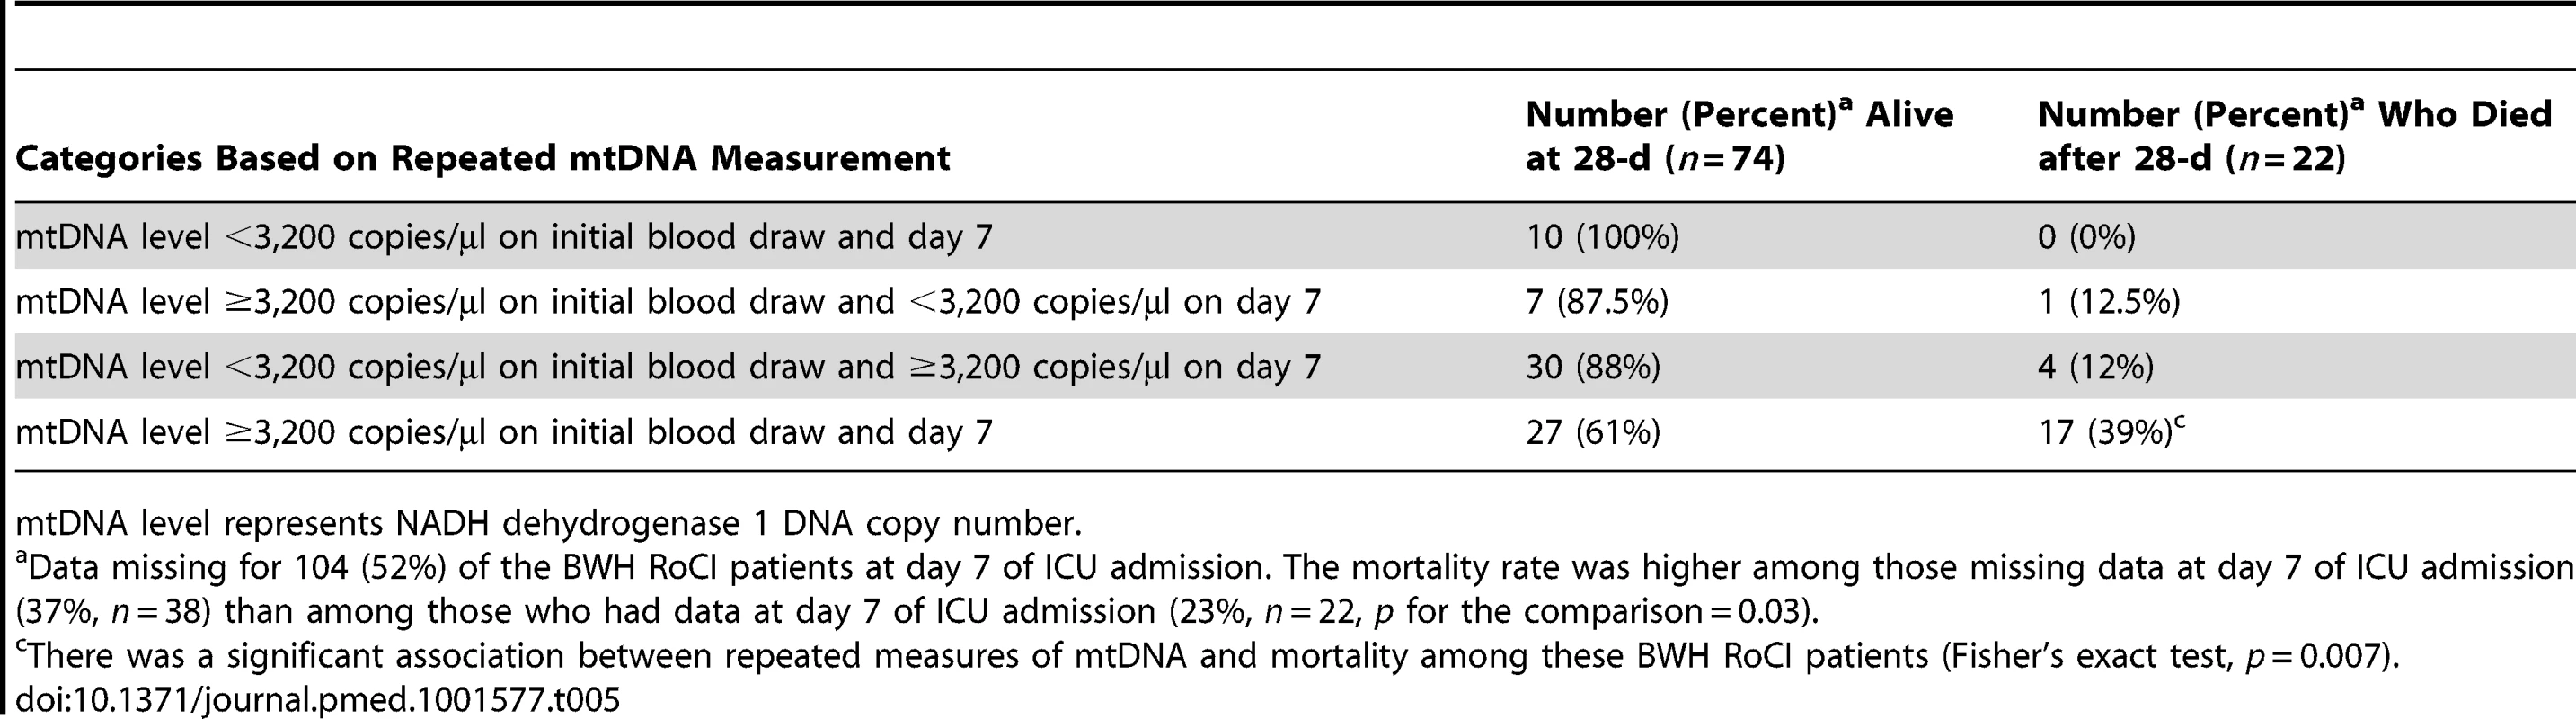 Repeated measures of mtDNA and 28-d mortality in the BWH RoCI cohort.